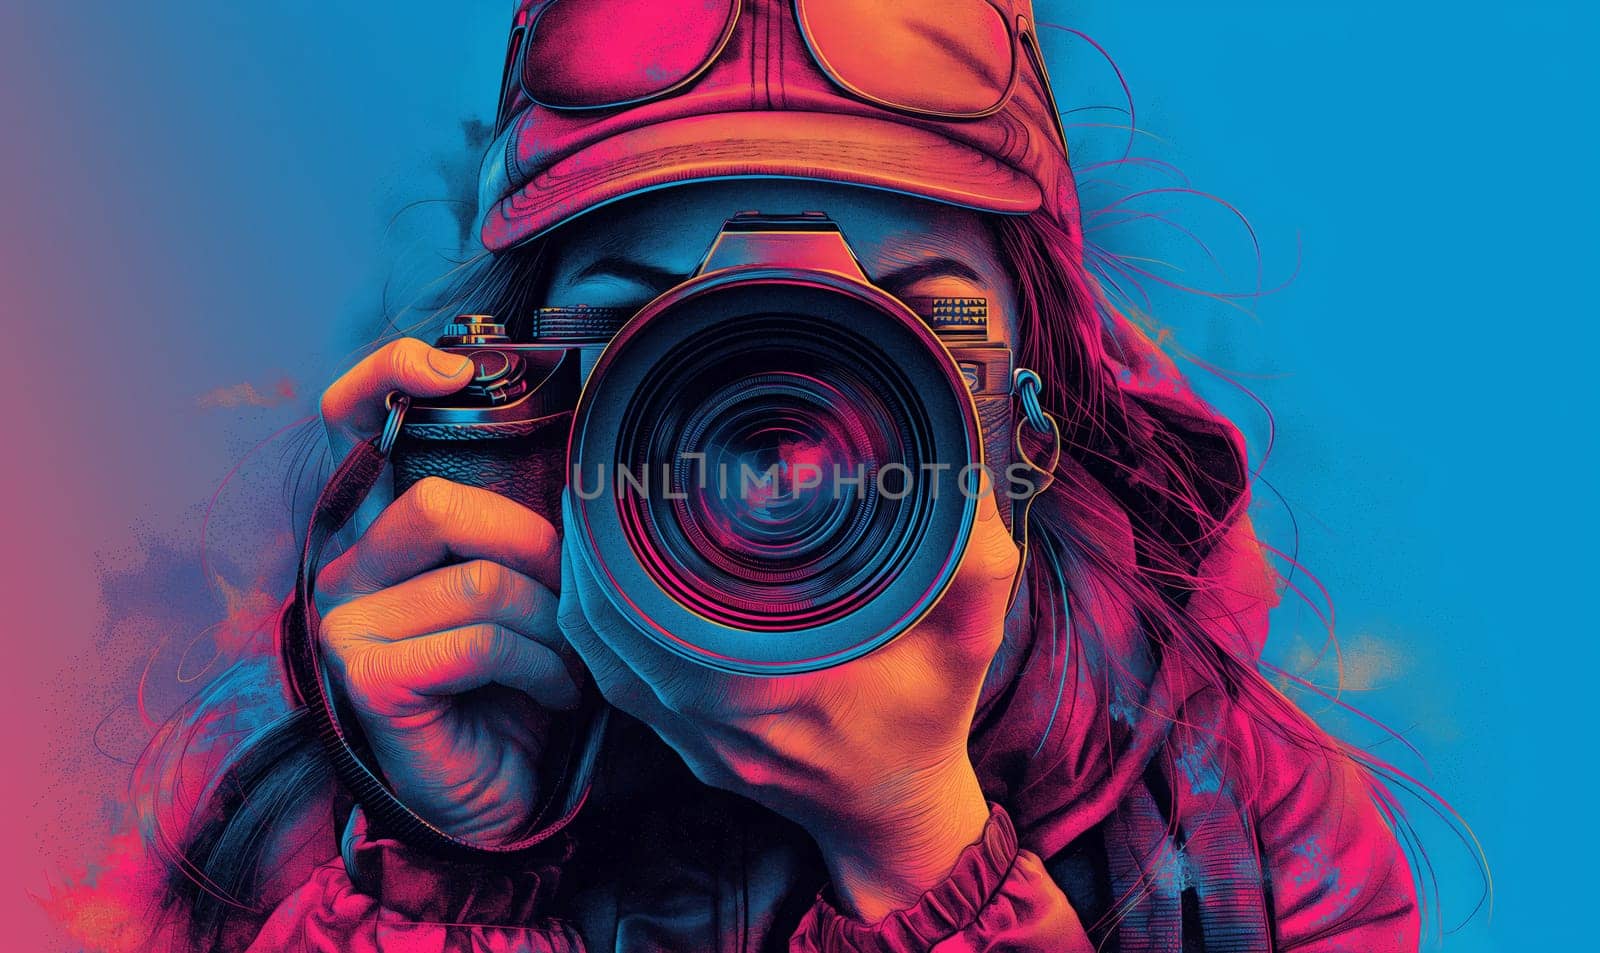 A woman takes a picture with a DSLR camera in an airbrush style. Selective focus.